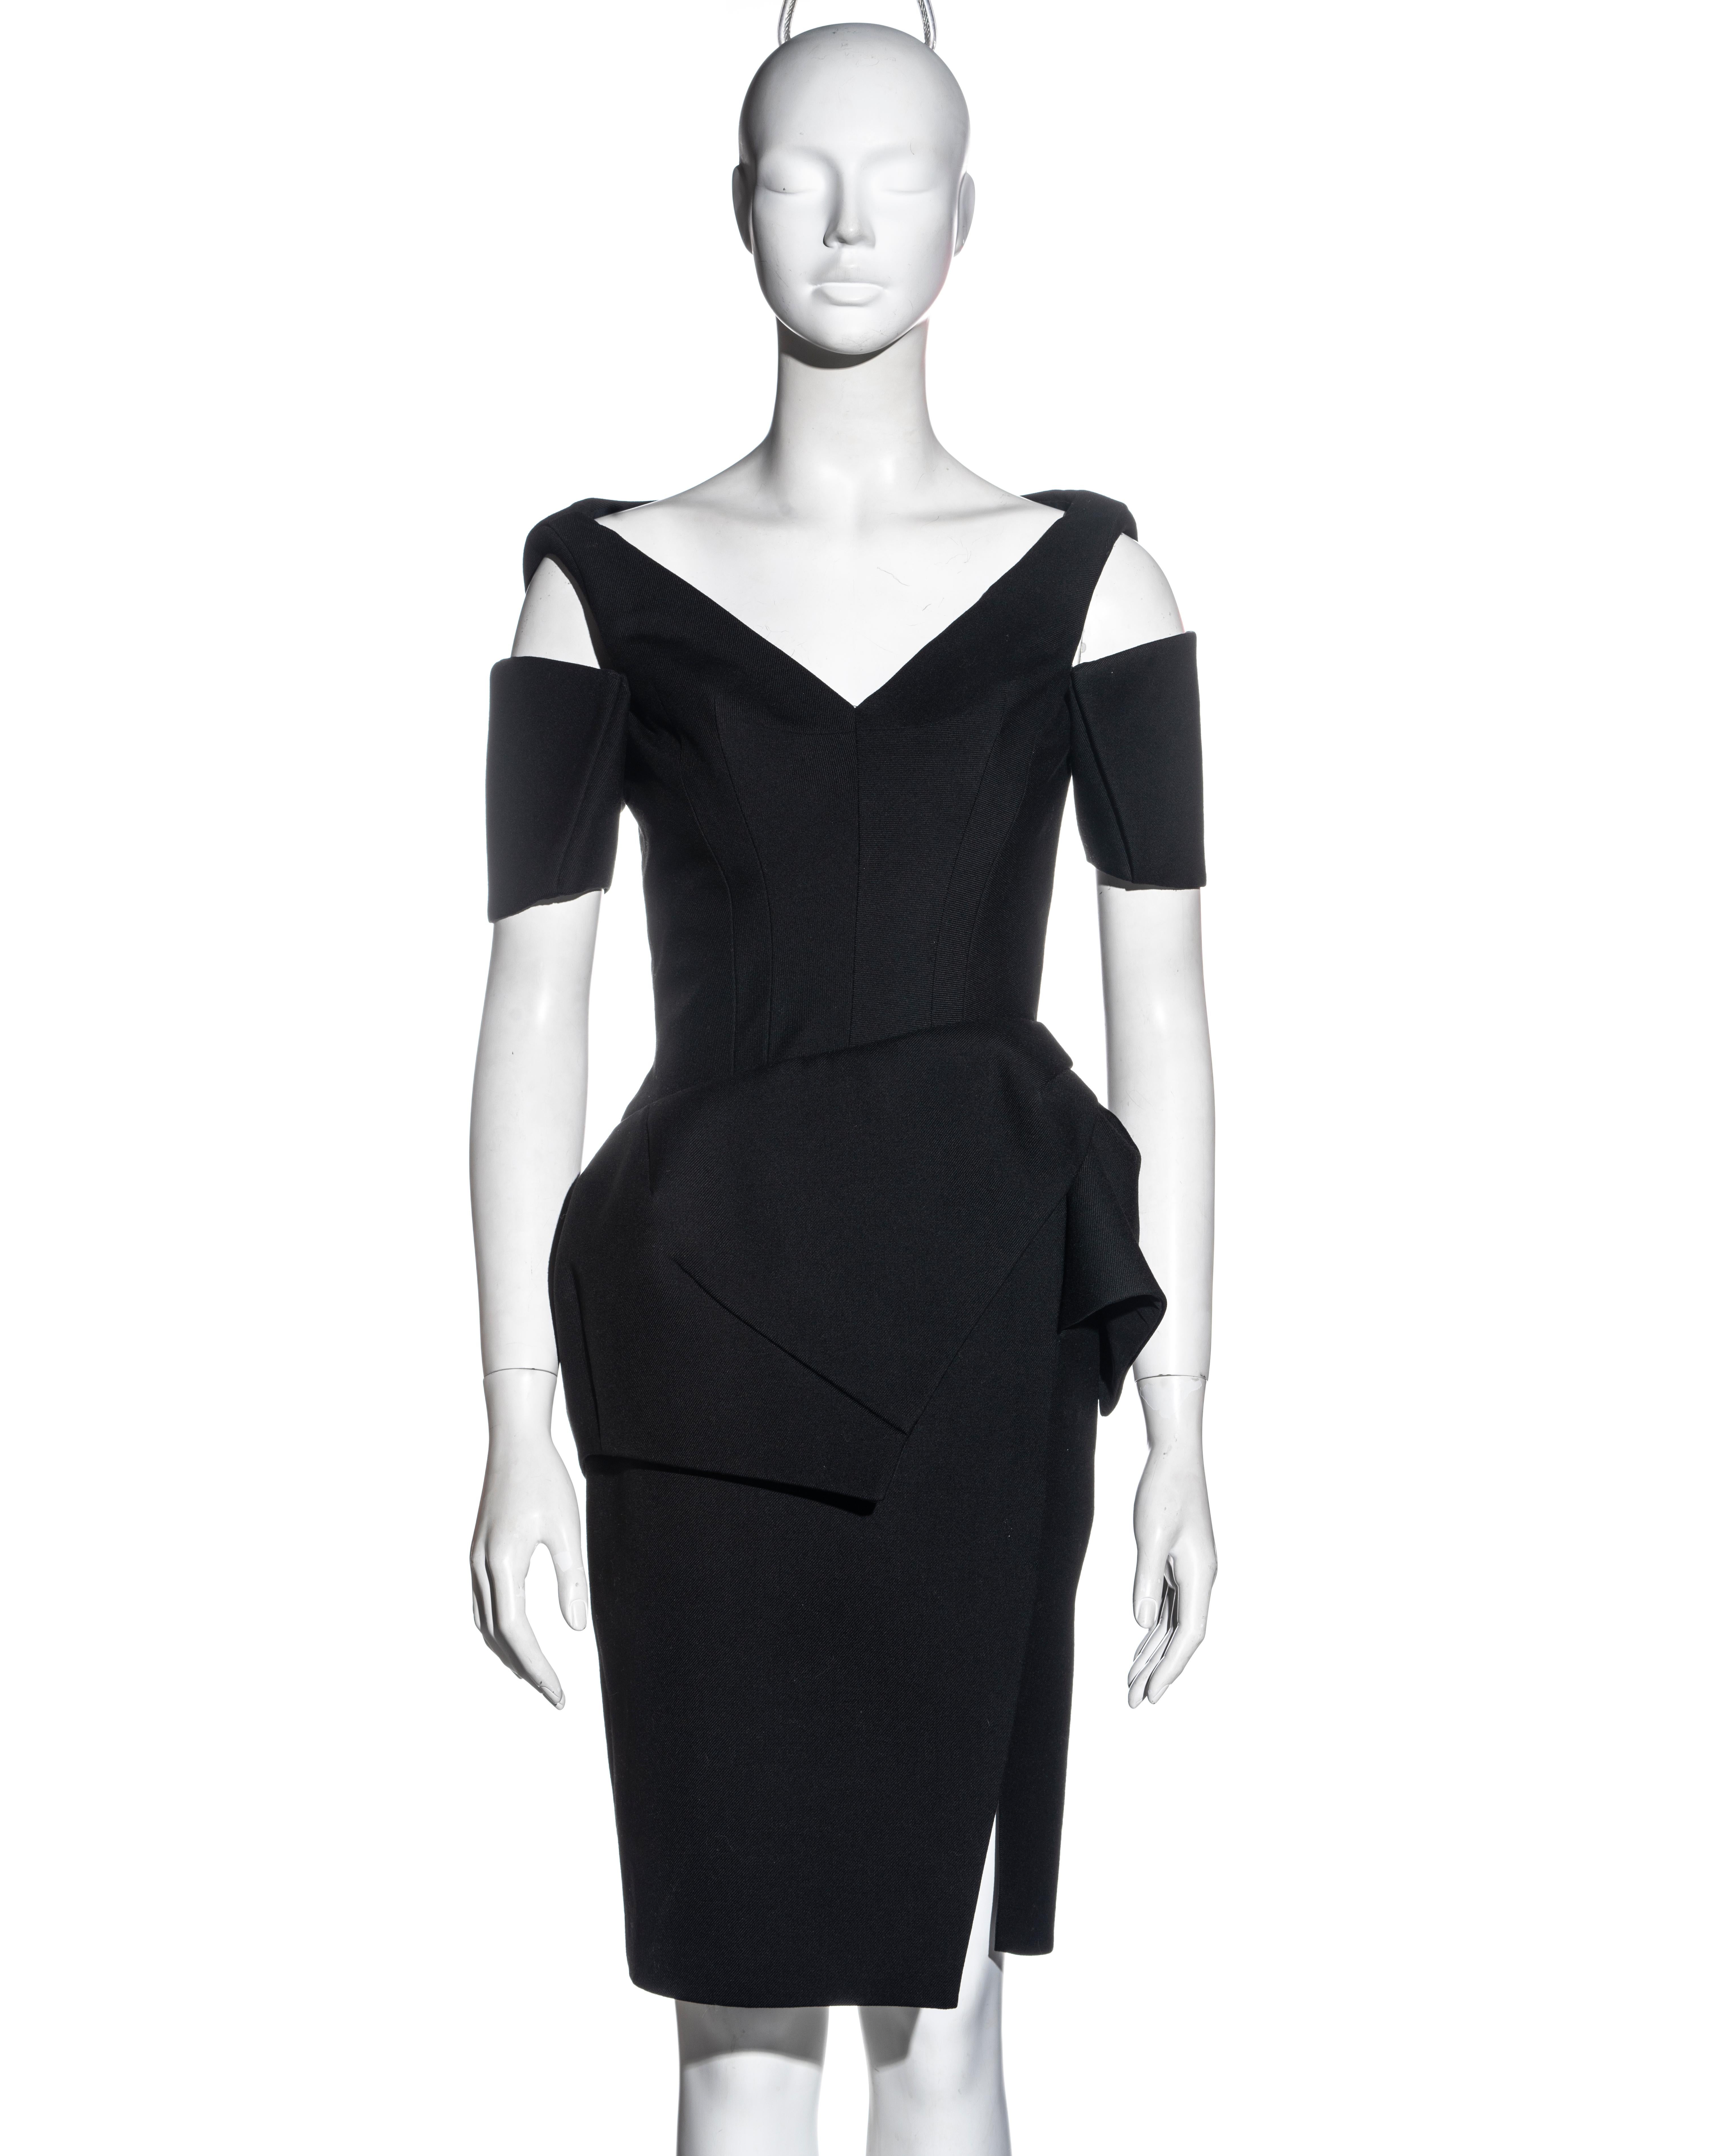 ▪ Balenciaga black wool structured cocktail dress 
▪ Designed by Nicolas Ghesquière 
▪ Black wool backed with neopreme
▪ Armband sleeves 
▪ Asymmetric draped peplum 
▪ Slit skirt  
▪ Corseted bodice 
▪ Padded shoulders  
▪ FR 36 - UK 8 - US 4
▪